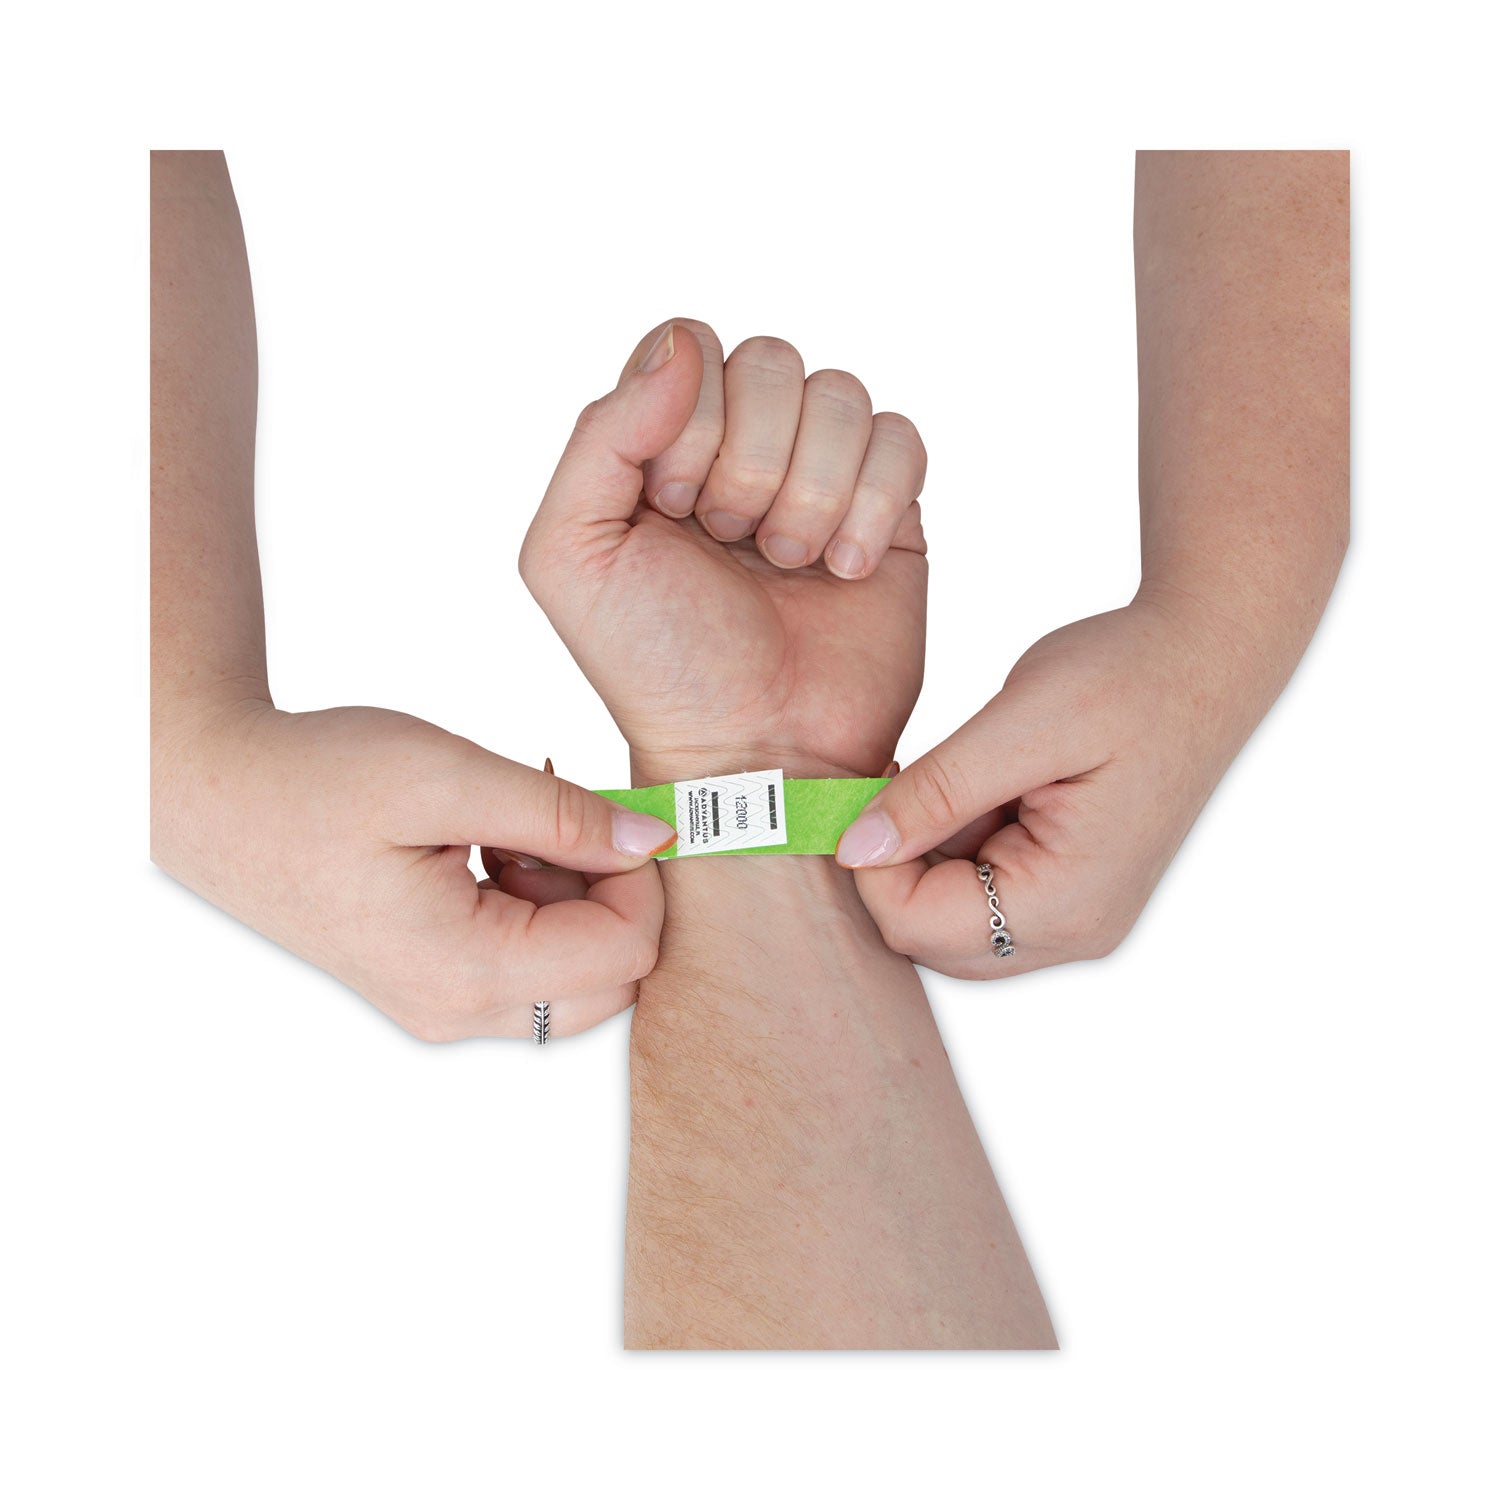 crowd-management-wristbands-sequentially-numbered-975-x-075-neon-green-500-pack_avt91122 - 6